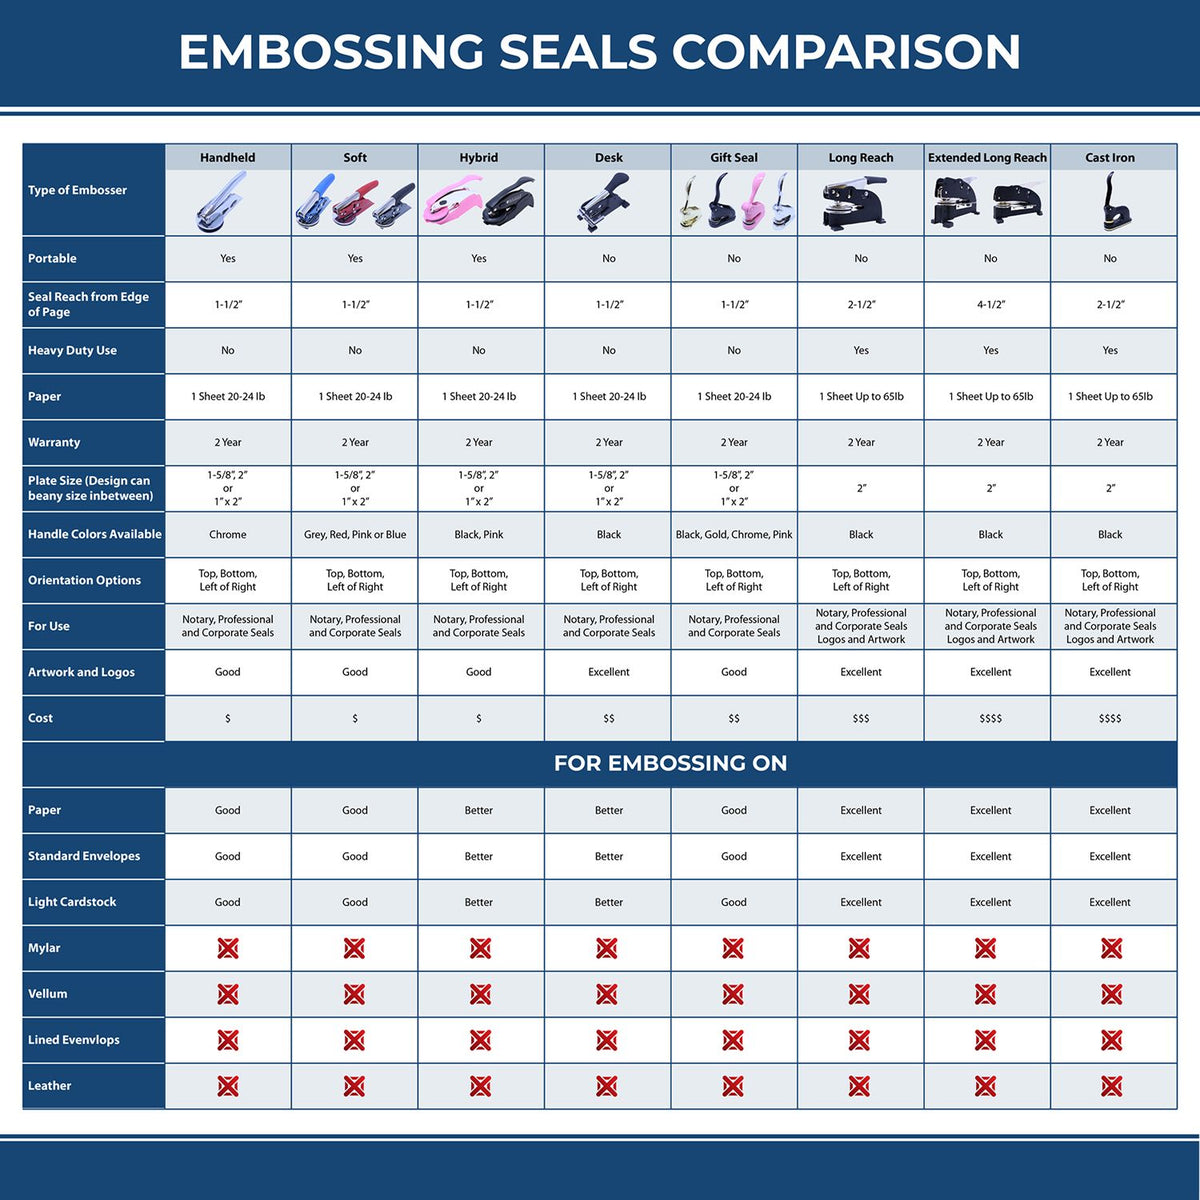 A comparison chart for the different types of mount models available for the Illinois Engineer Desk Seal.